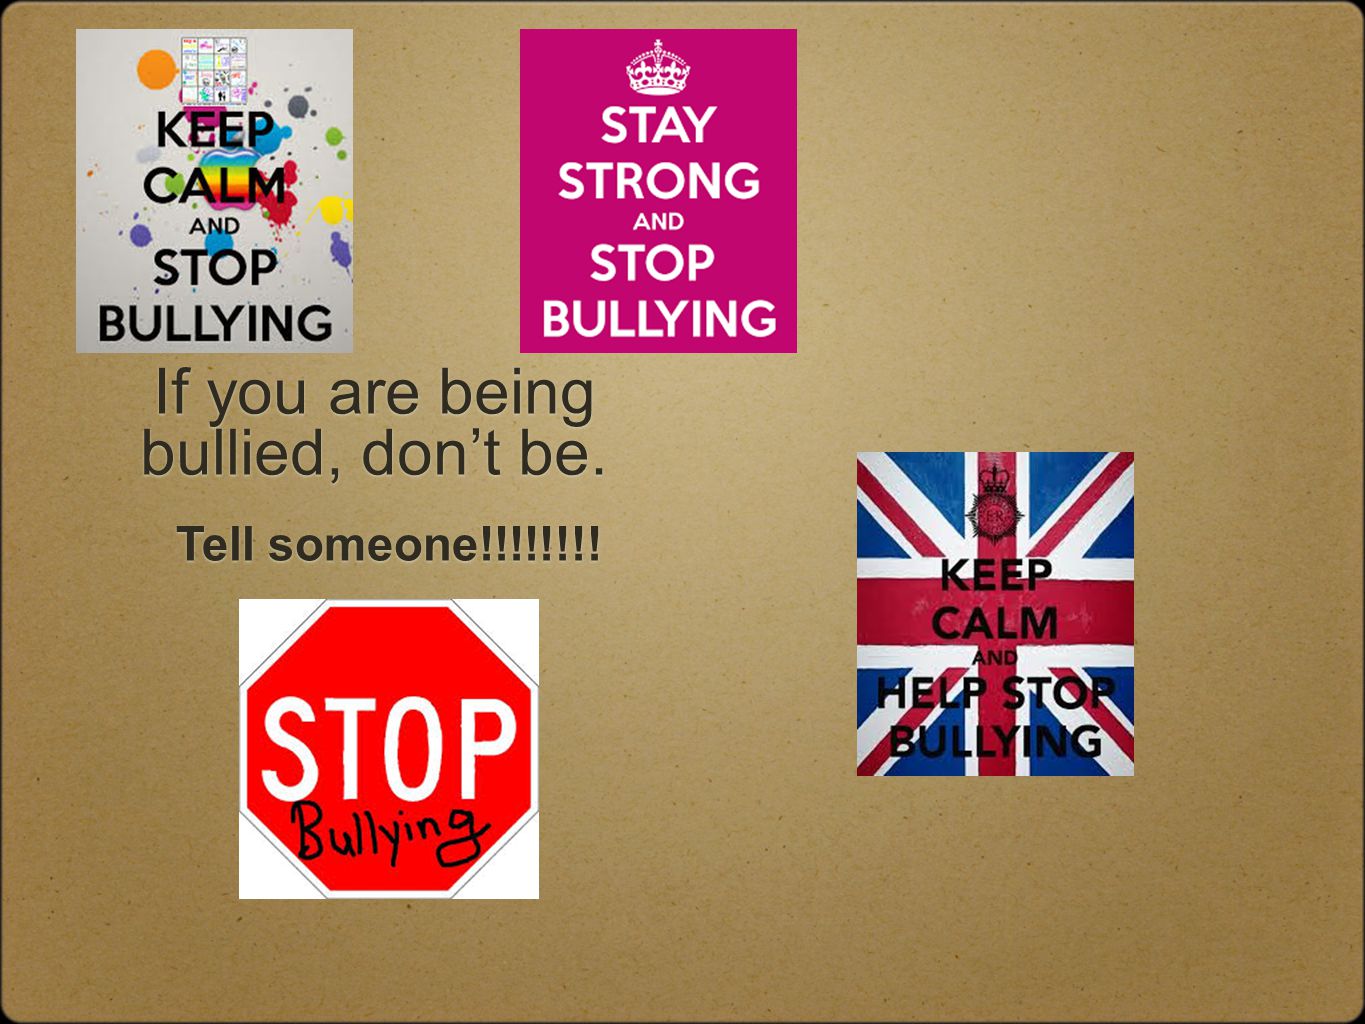 If you are being bullied, don’t be.